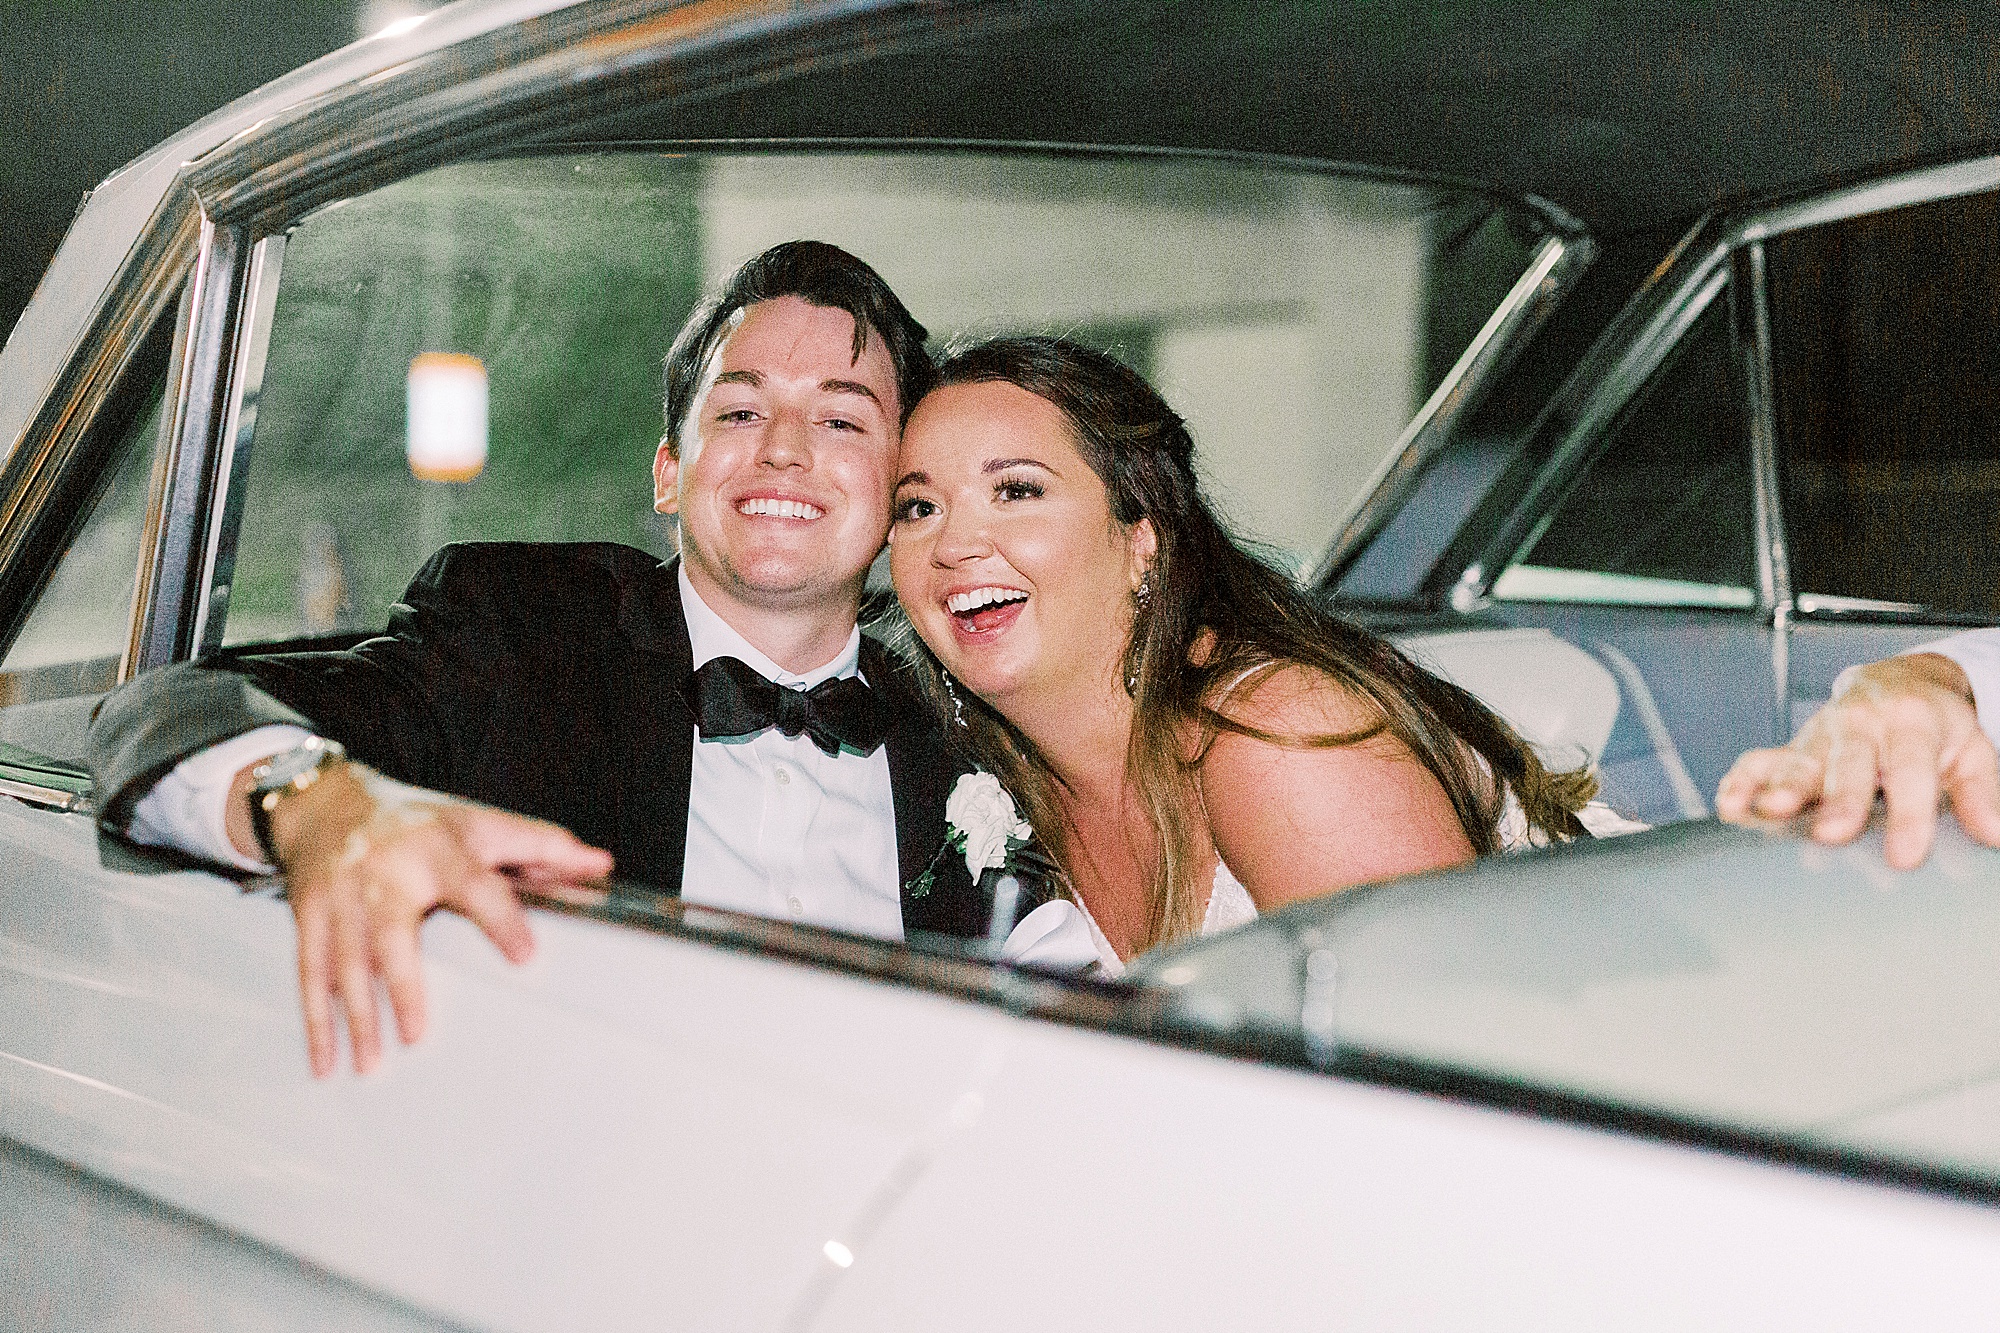 newlyweds laugh in back of car